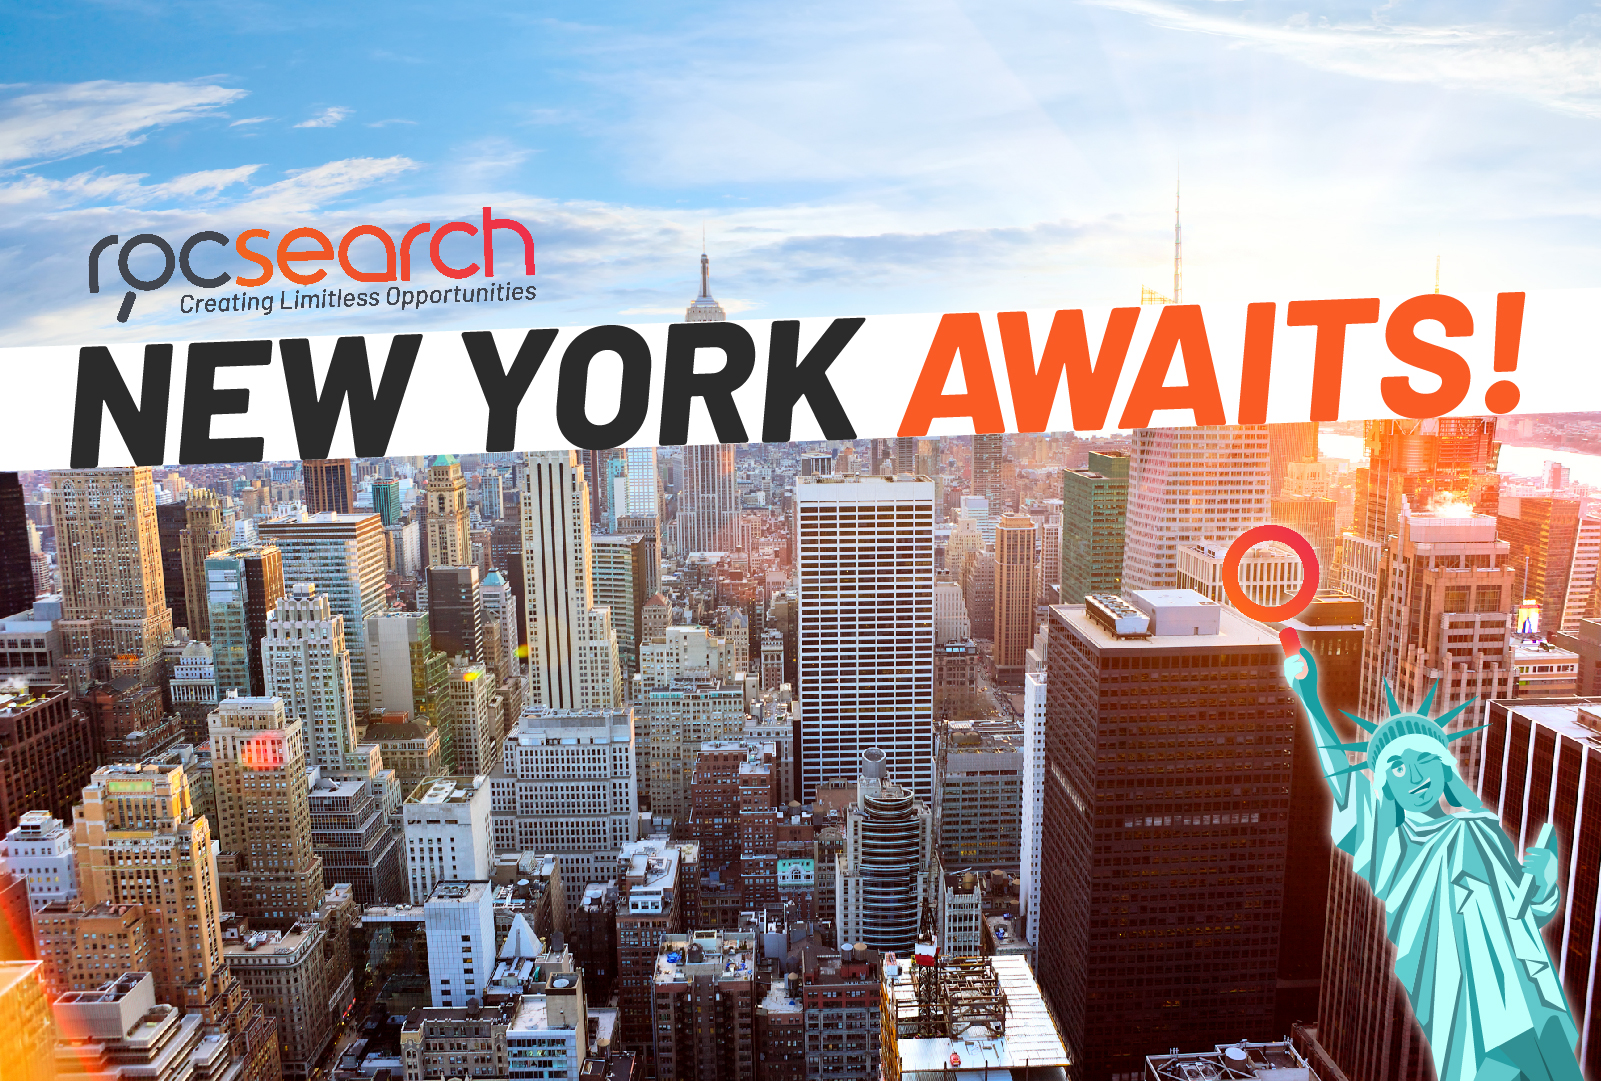 Recruiters, a career in New York City awaits…